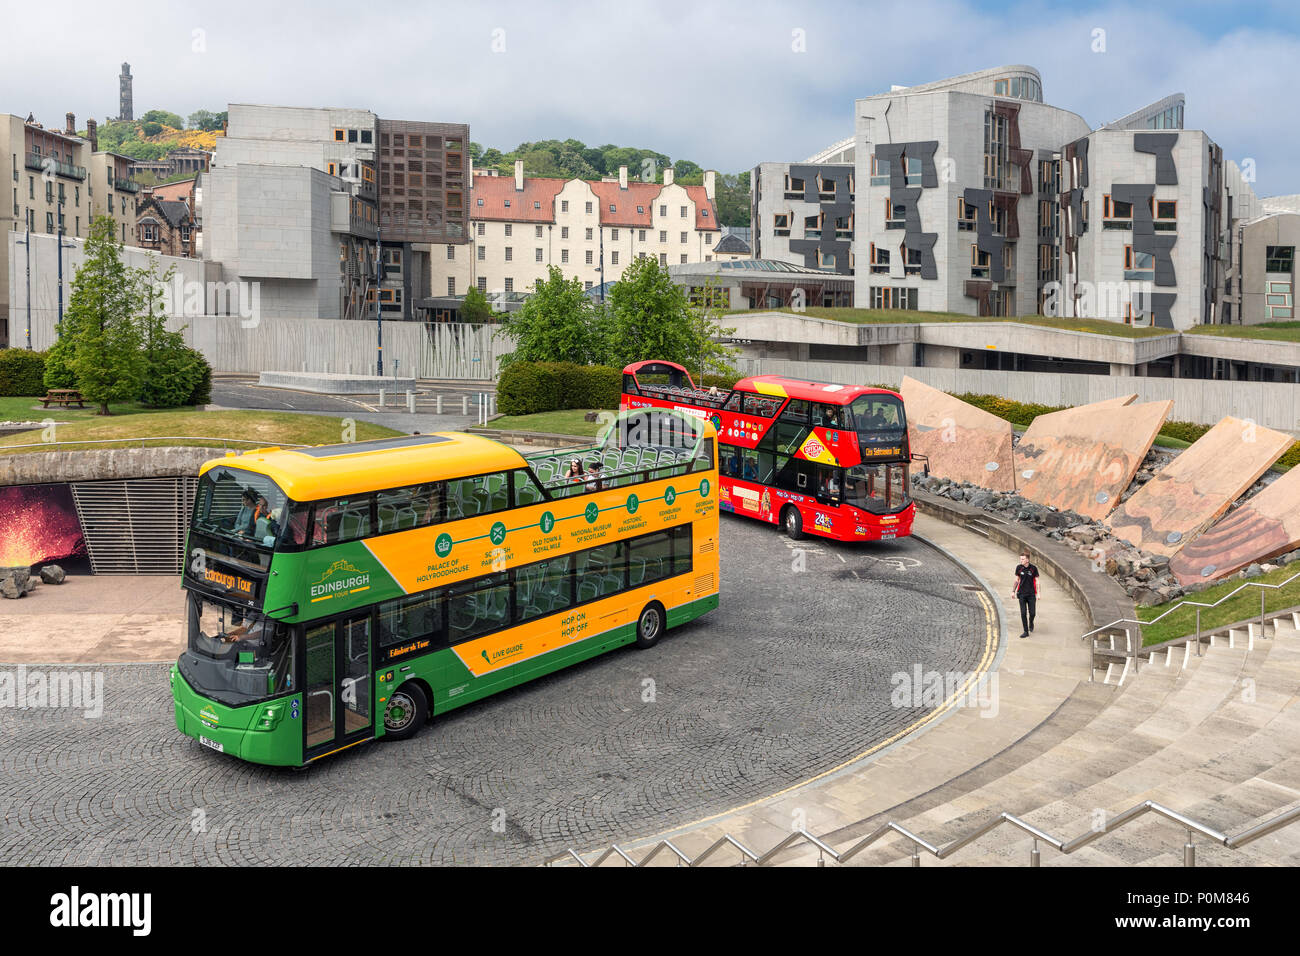 Sightseeing buses in front of science museum Dynamic Earth Edinburgh Stock Photo